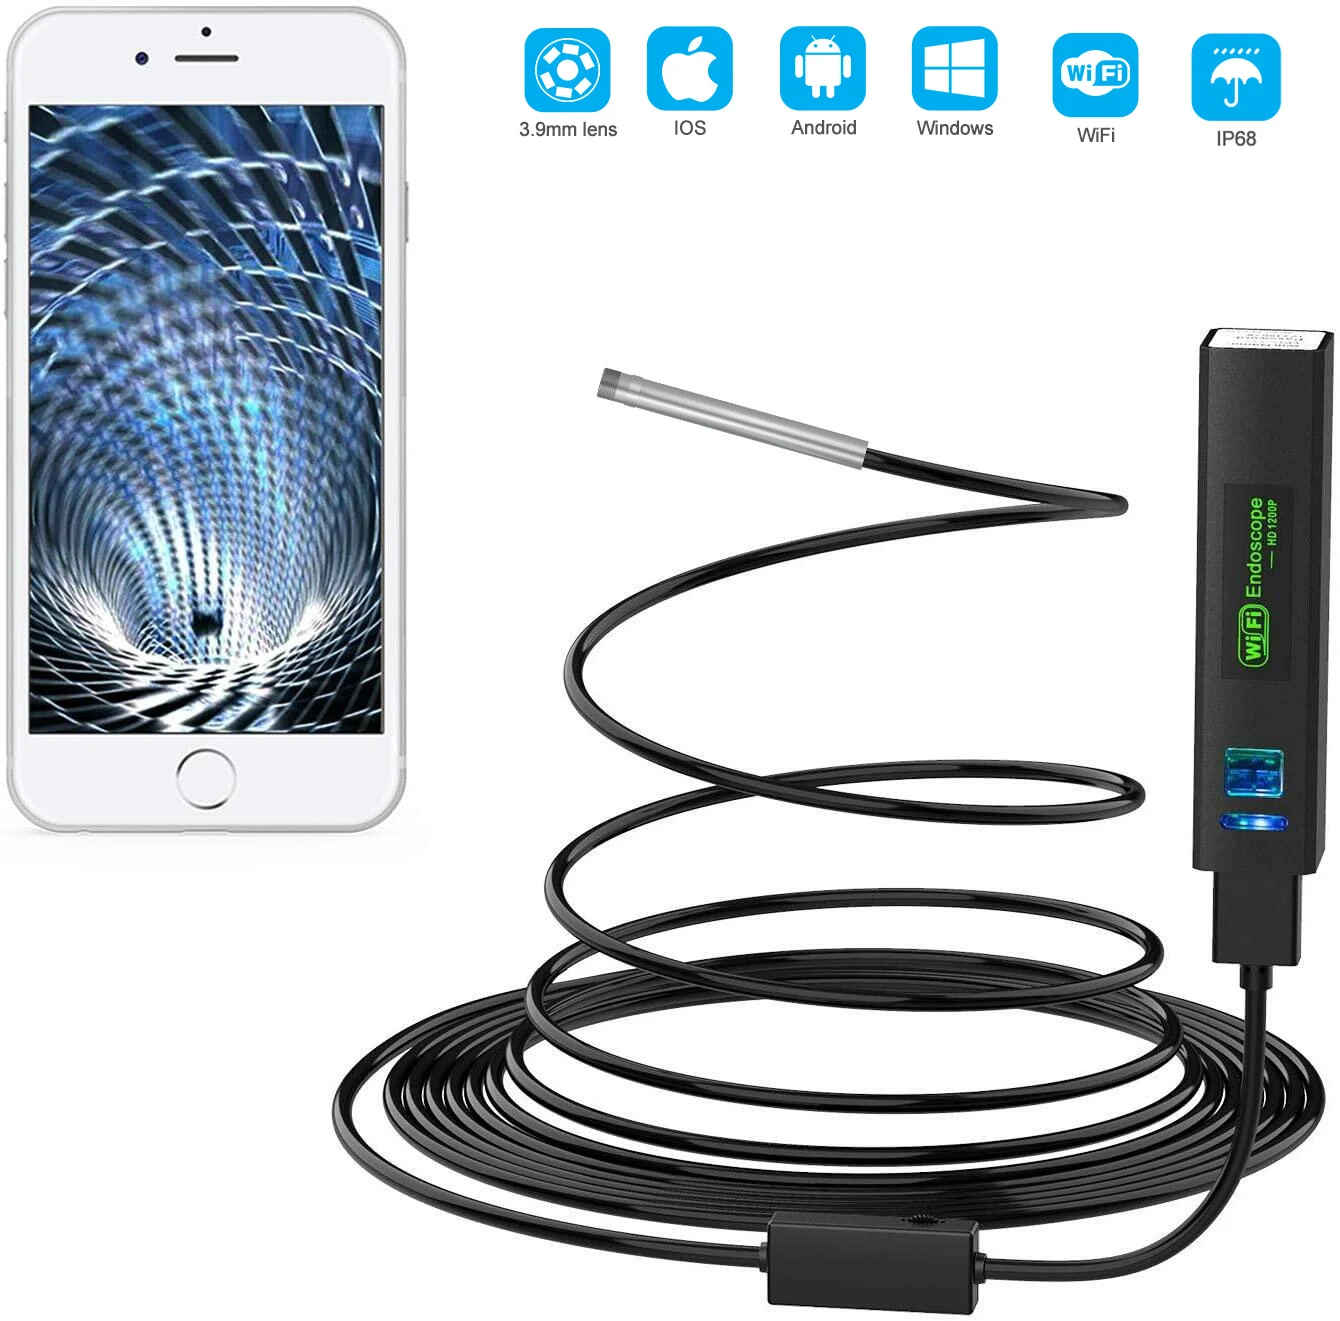 cctv camera for home Wireless Snake Camera 1200P 3.9mm WiFi Inspection Camera HD Endoscope with 6 LED Rigid Cable Borescope for iPhone Huawei Ipad PC best indoor security camera